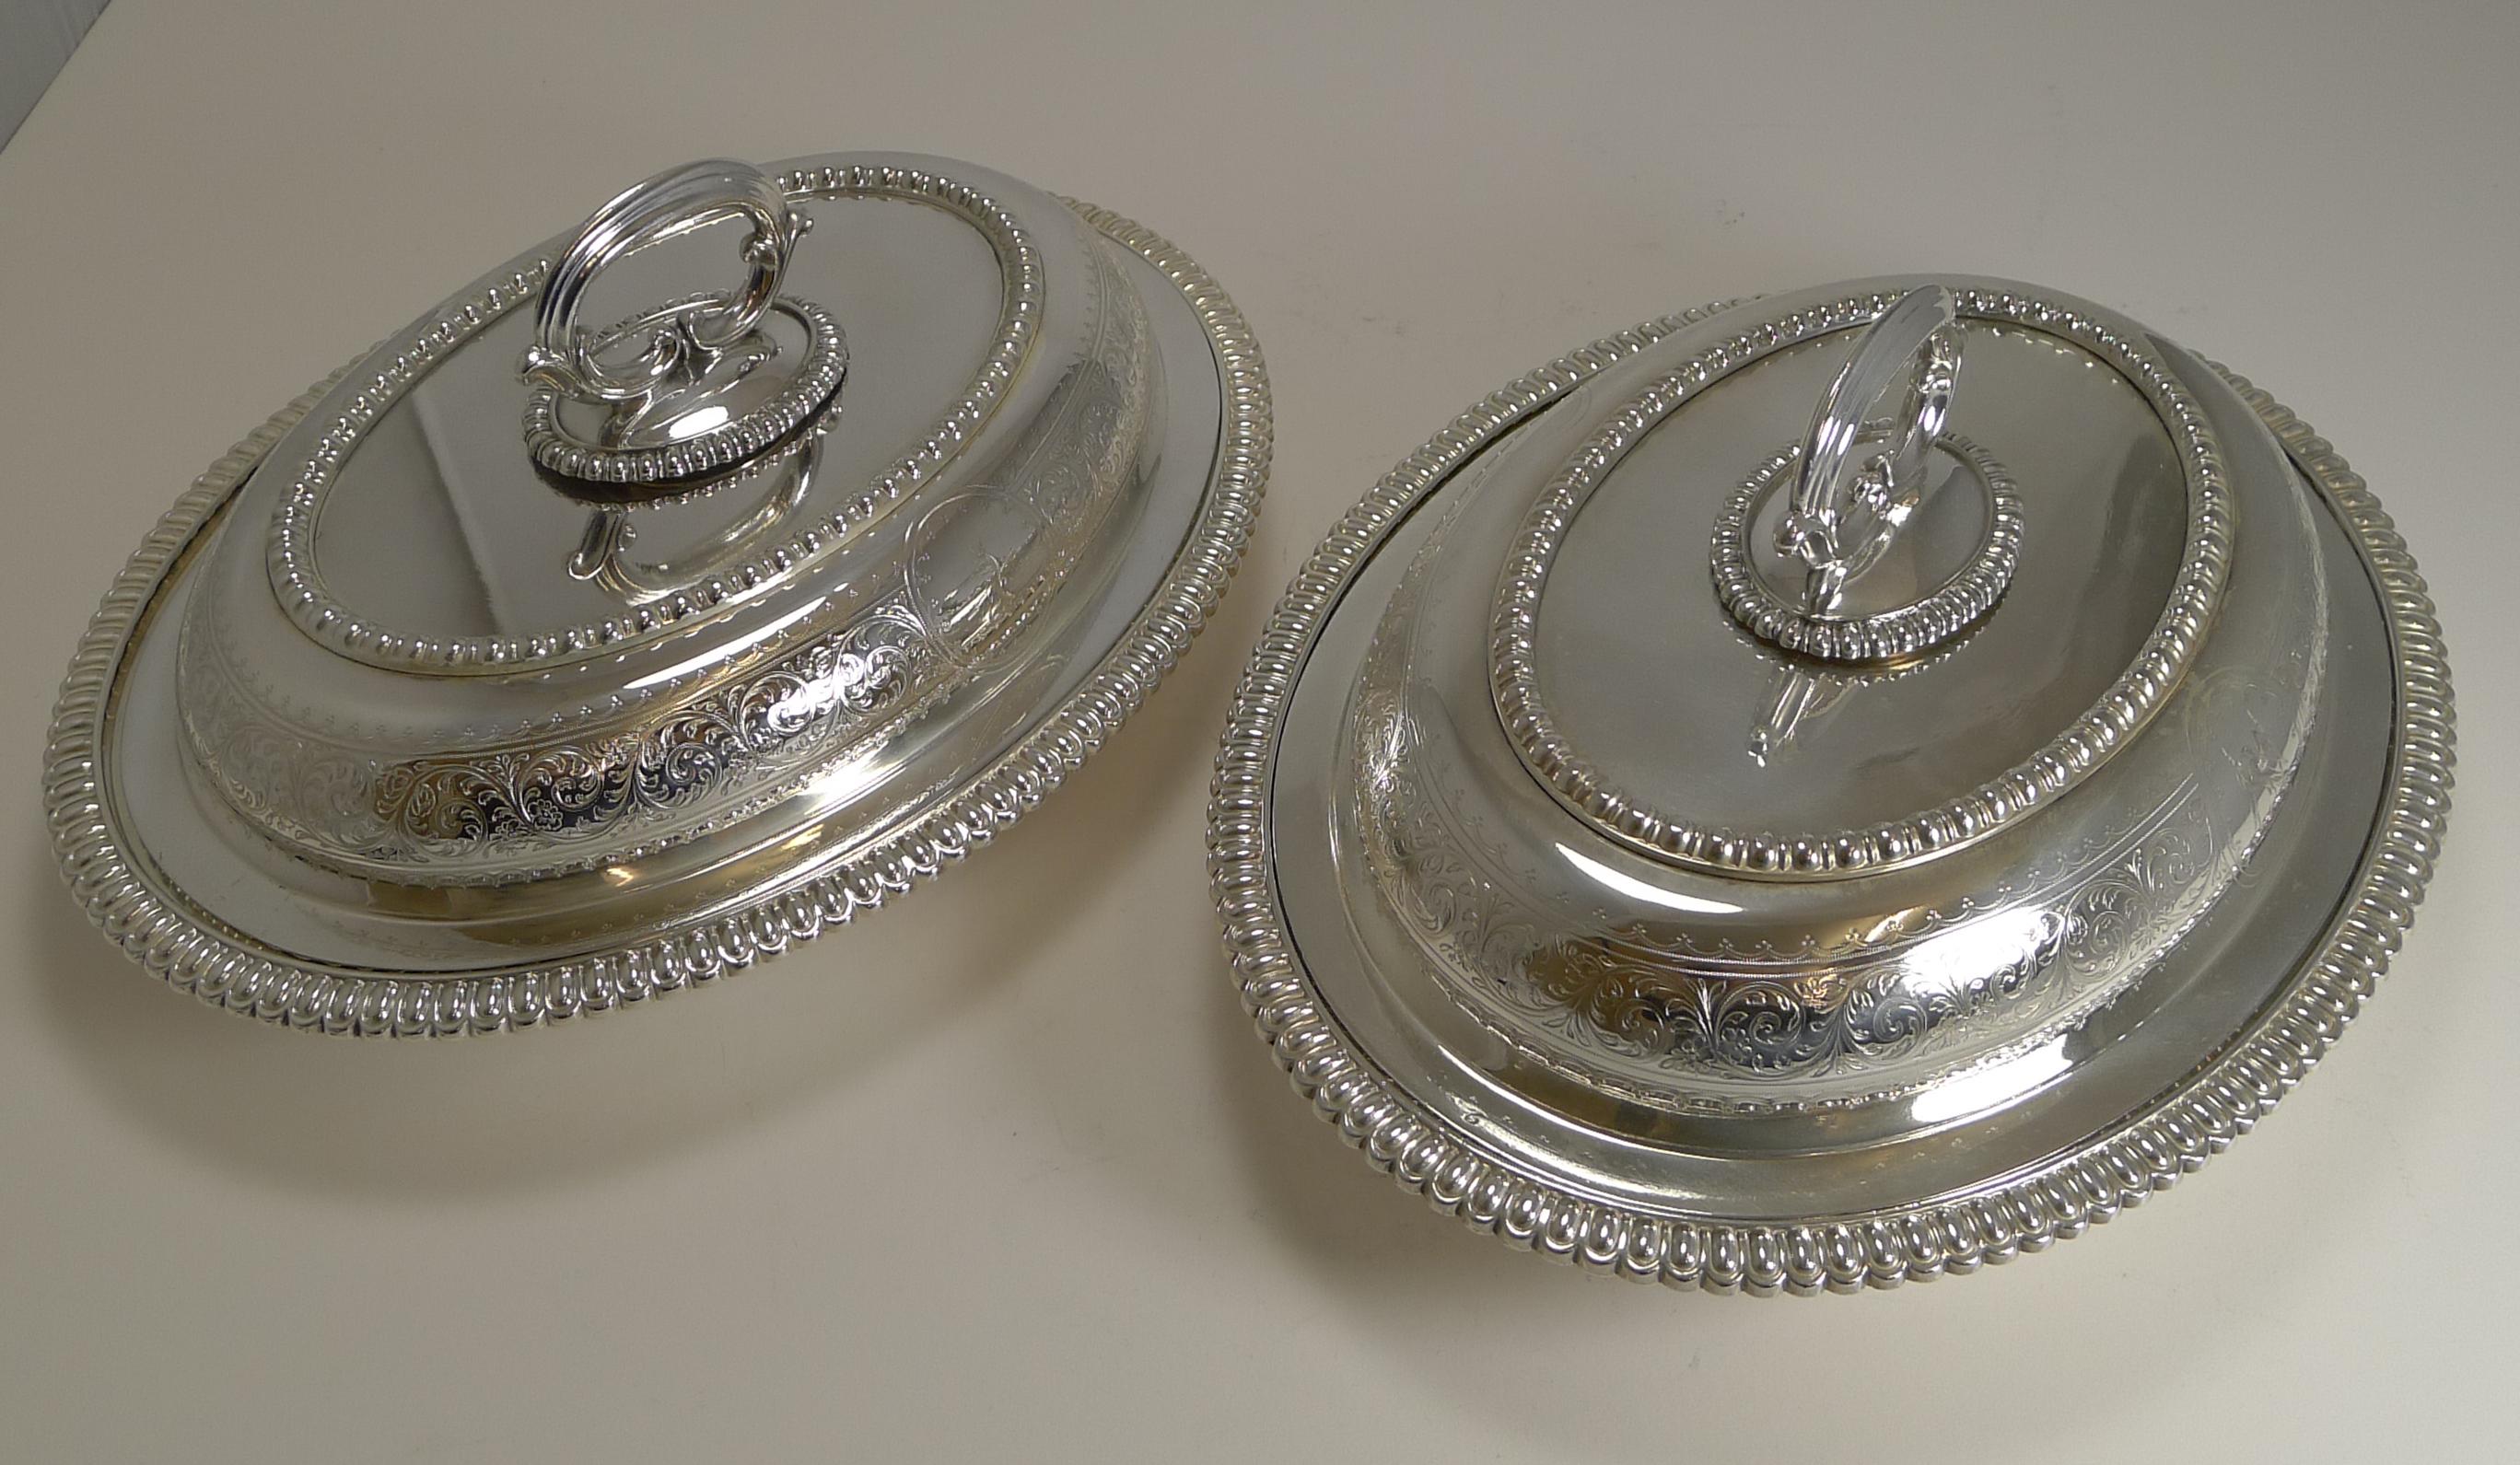 English Pair of Elkington Silver Plated Entree/Serving Dishes, 1884